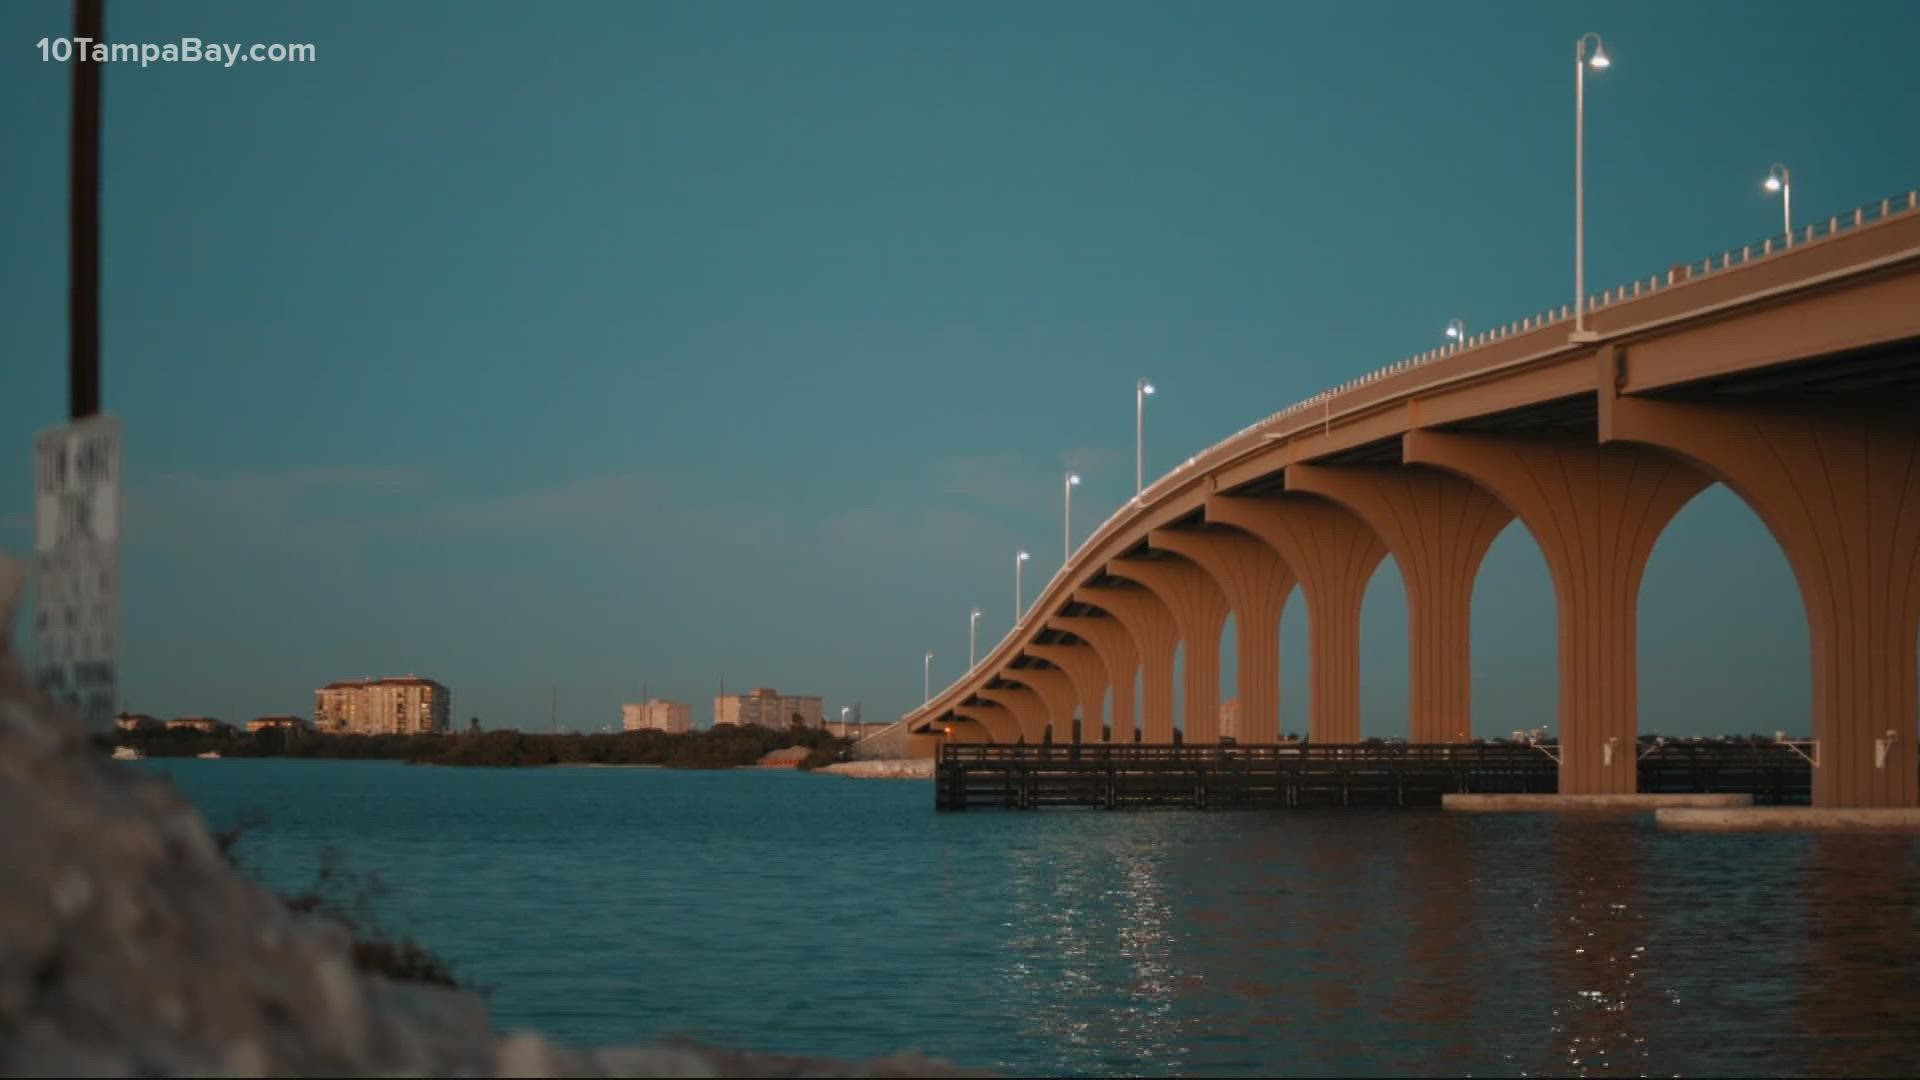 The American Road & Transportation Builder Association identified repairs needed on 1,003 Florida bridges and estimated the cost would be $2.7 billion.